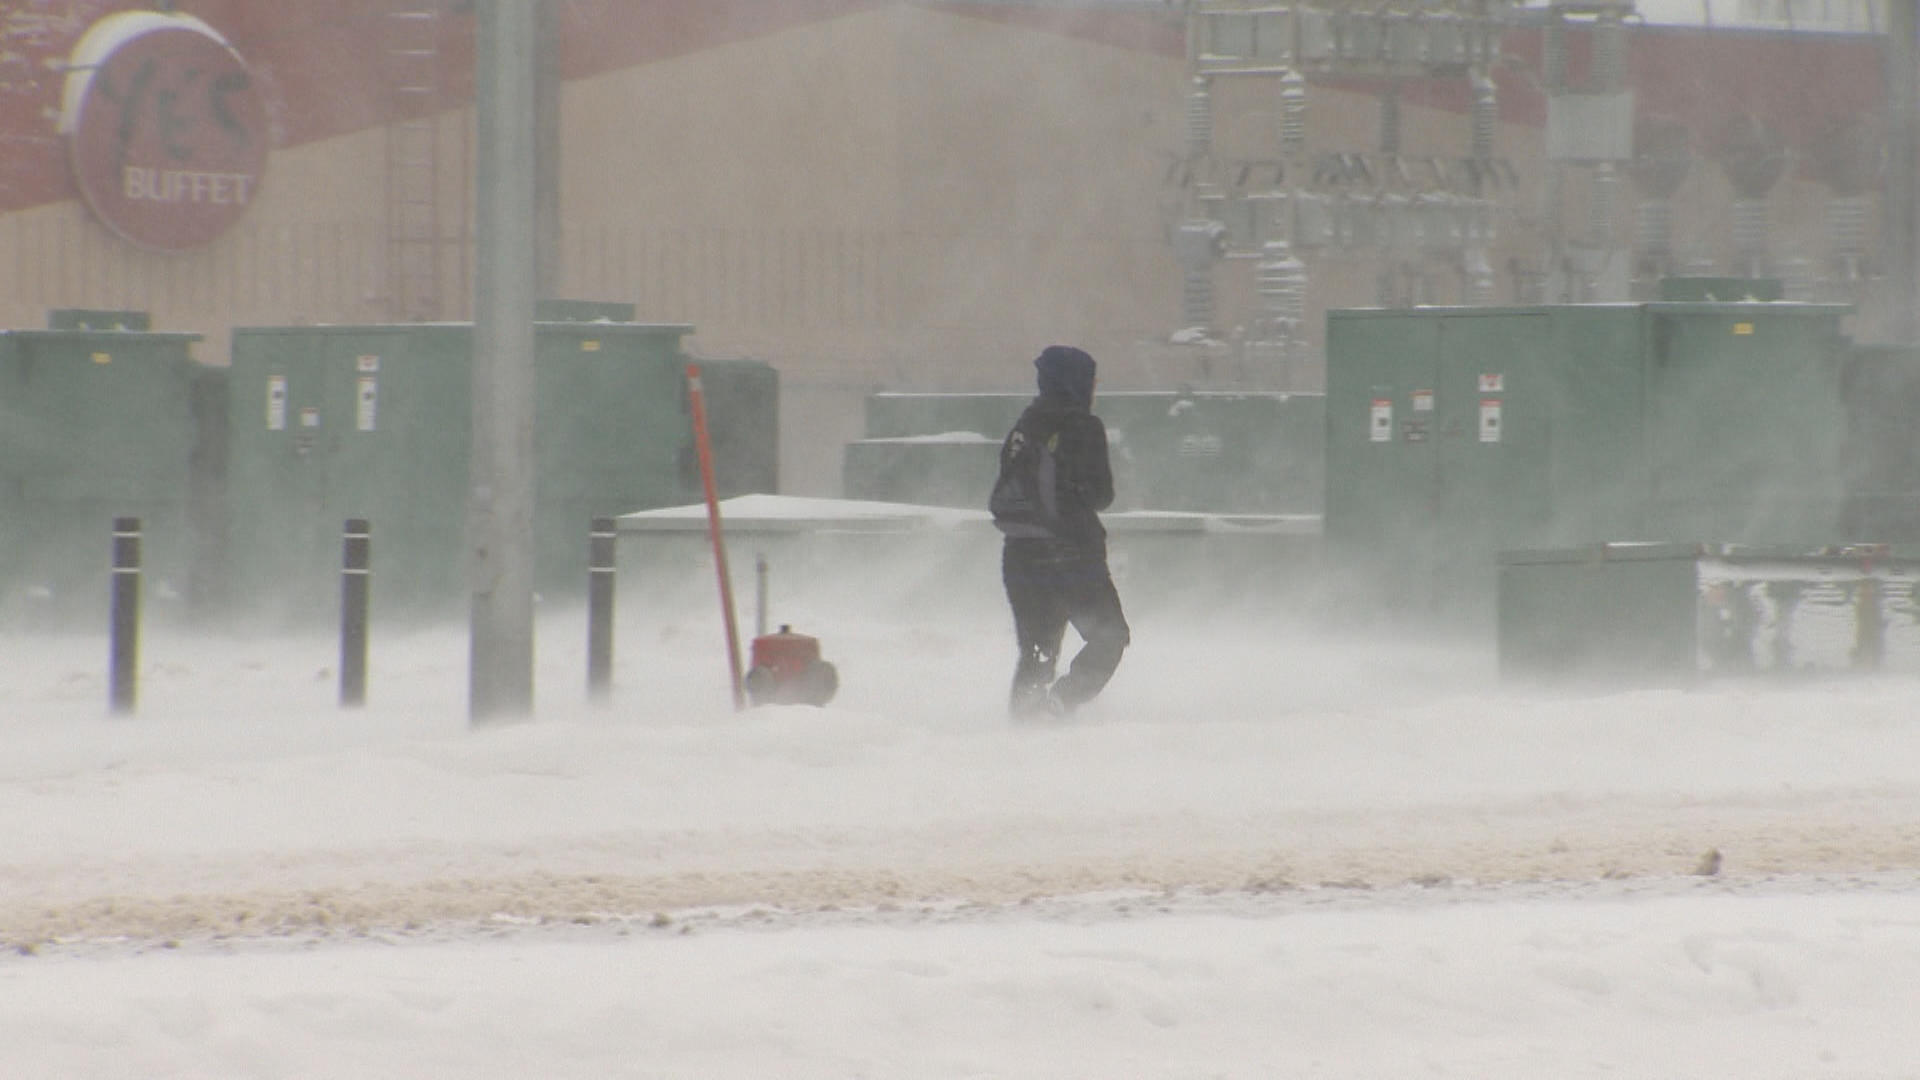 Manitoba’s spring snow storm didn’t reach the historic proportions some had been expecting, but Environment Canada says the province isn’t quite out of the woods yet.